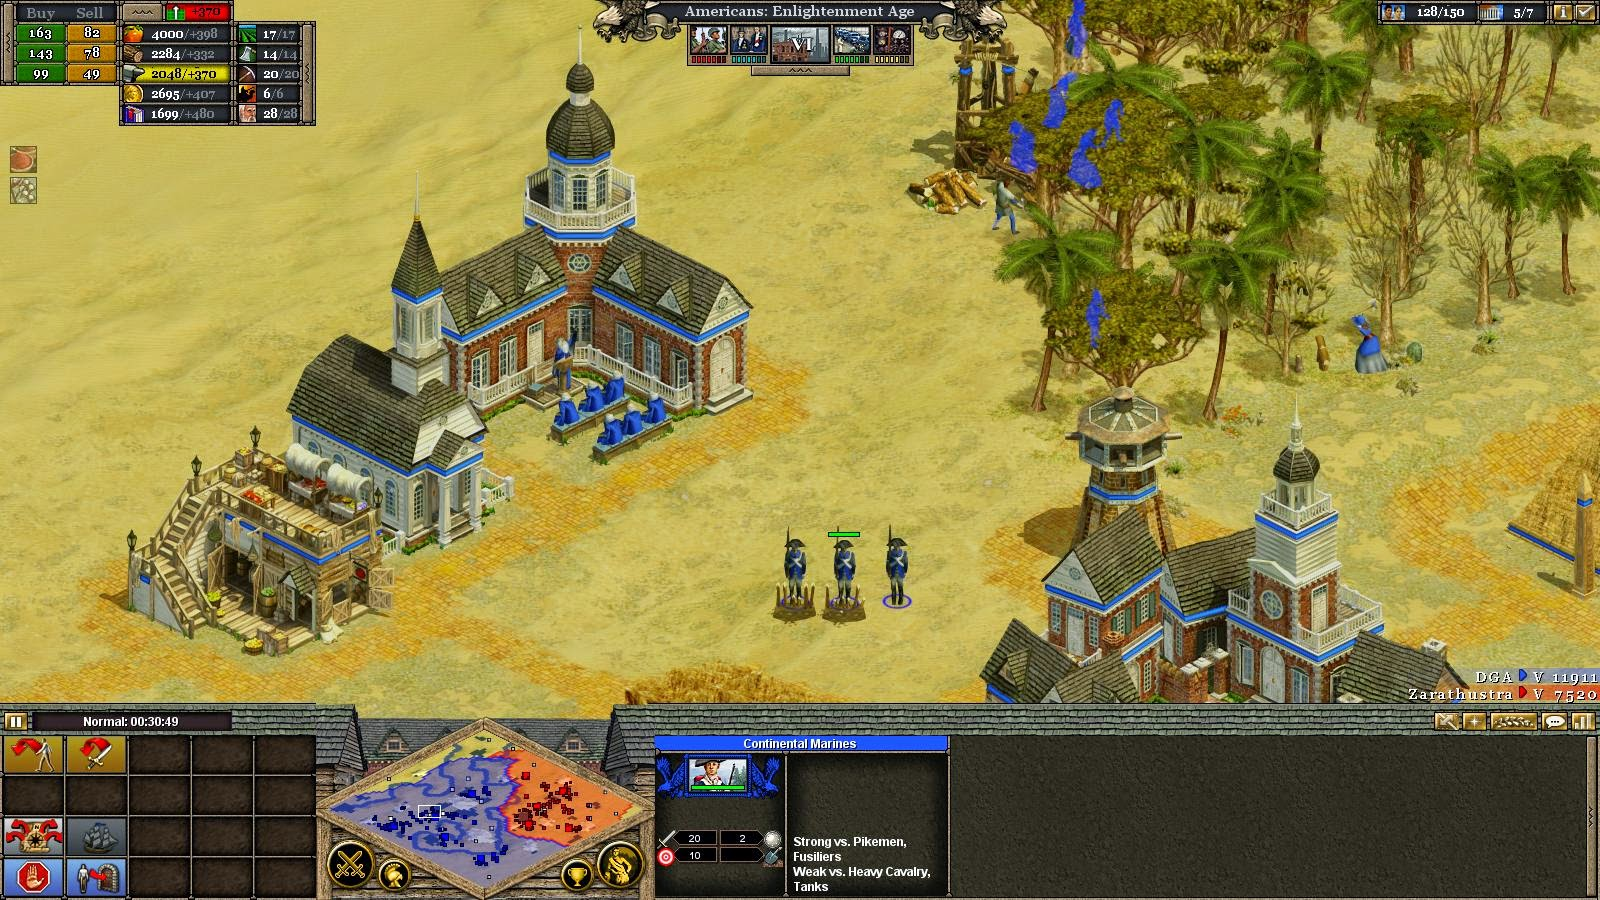 Modern Times: World In Conlict Mod for Rise of Nations: Thrones and Patriots  - ModDB